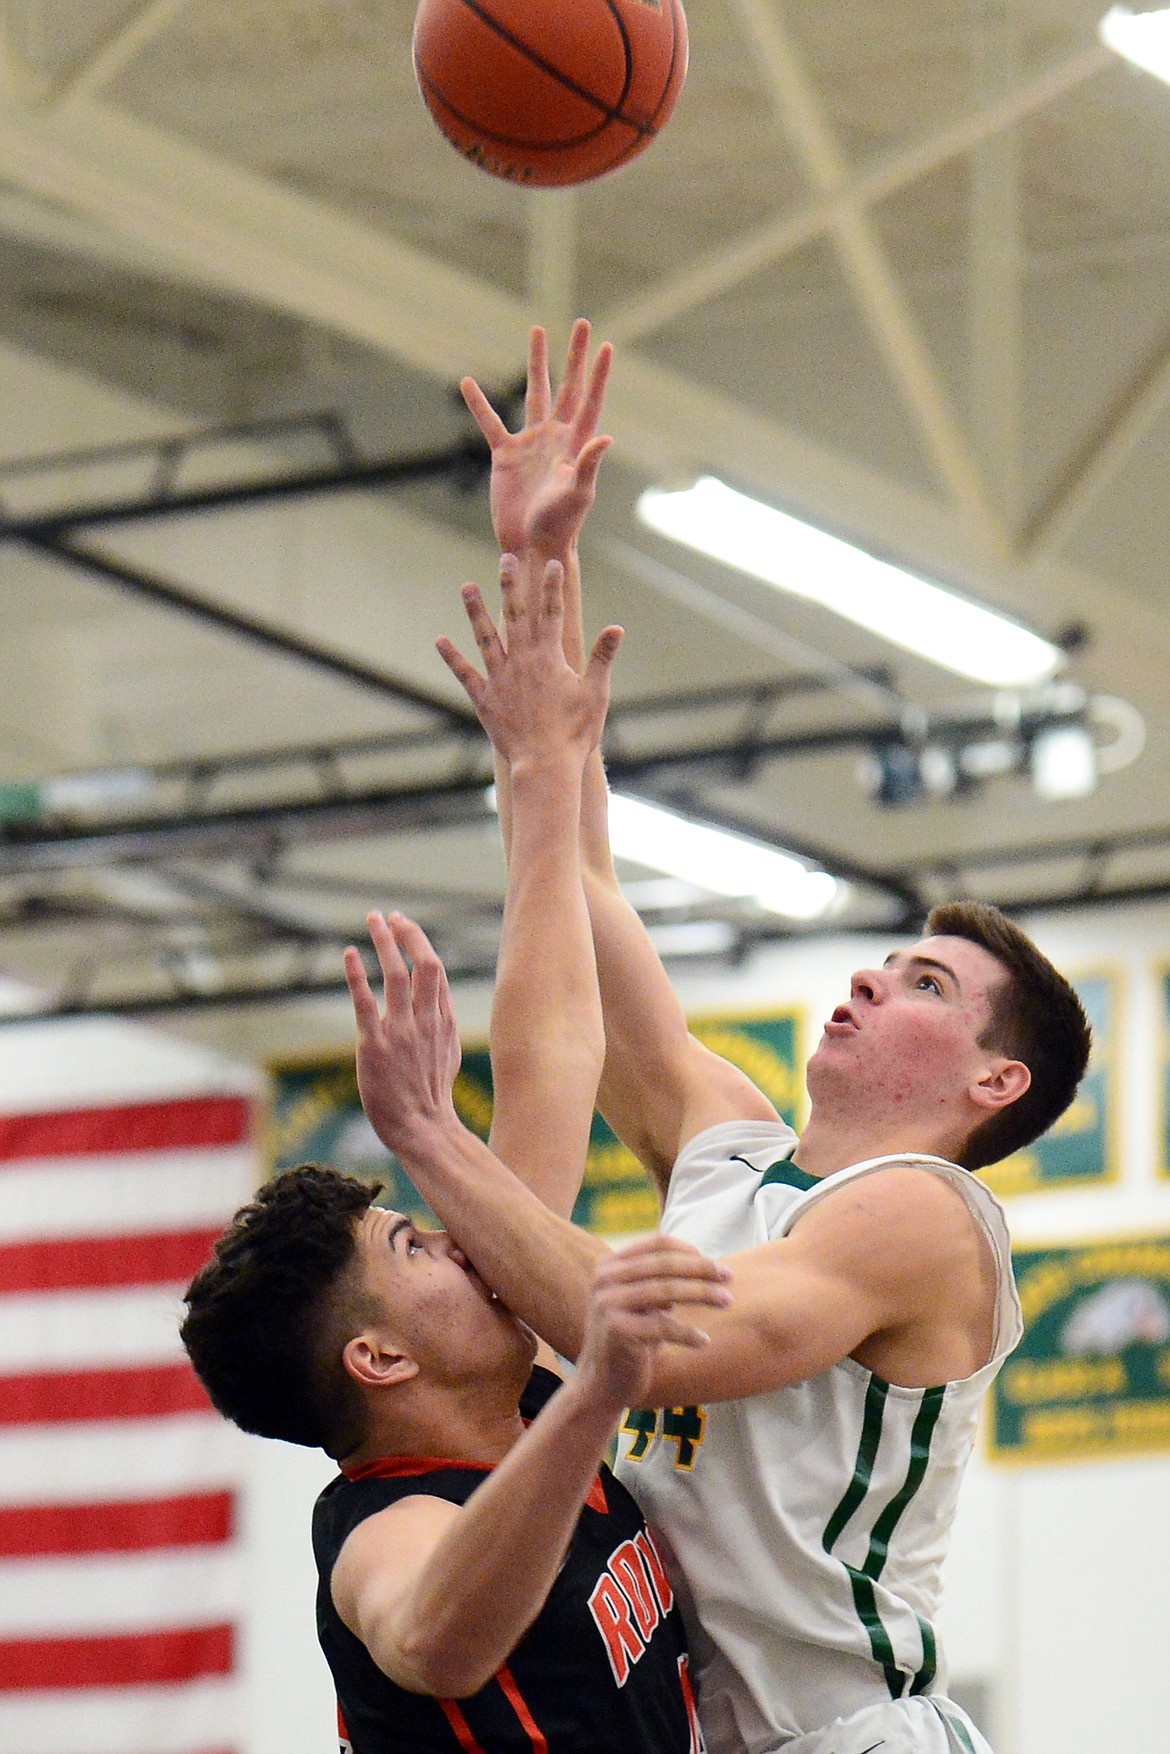 Whitefish's Lee Walburn (44) drives to the basket against Ronan's Ruben Couture (4) at Whitefish High School on Tuesday. (Casey Kreider/Daily Inter Lake)